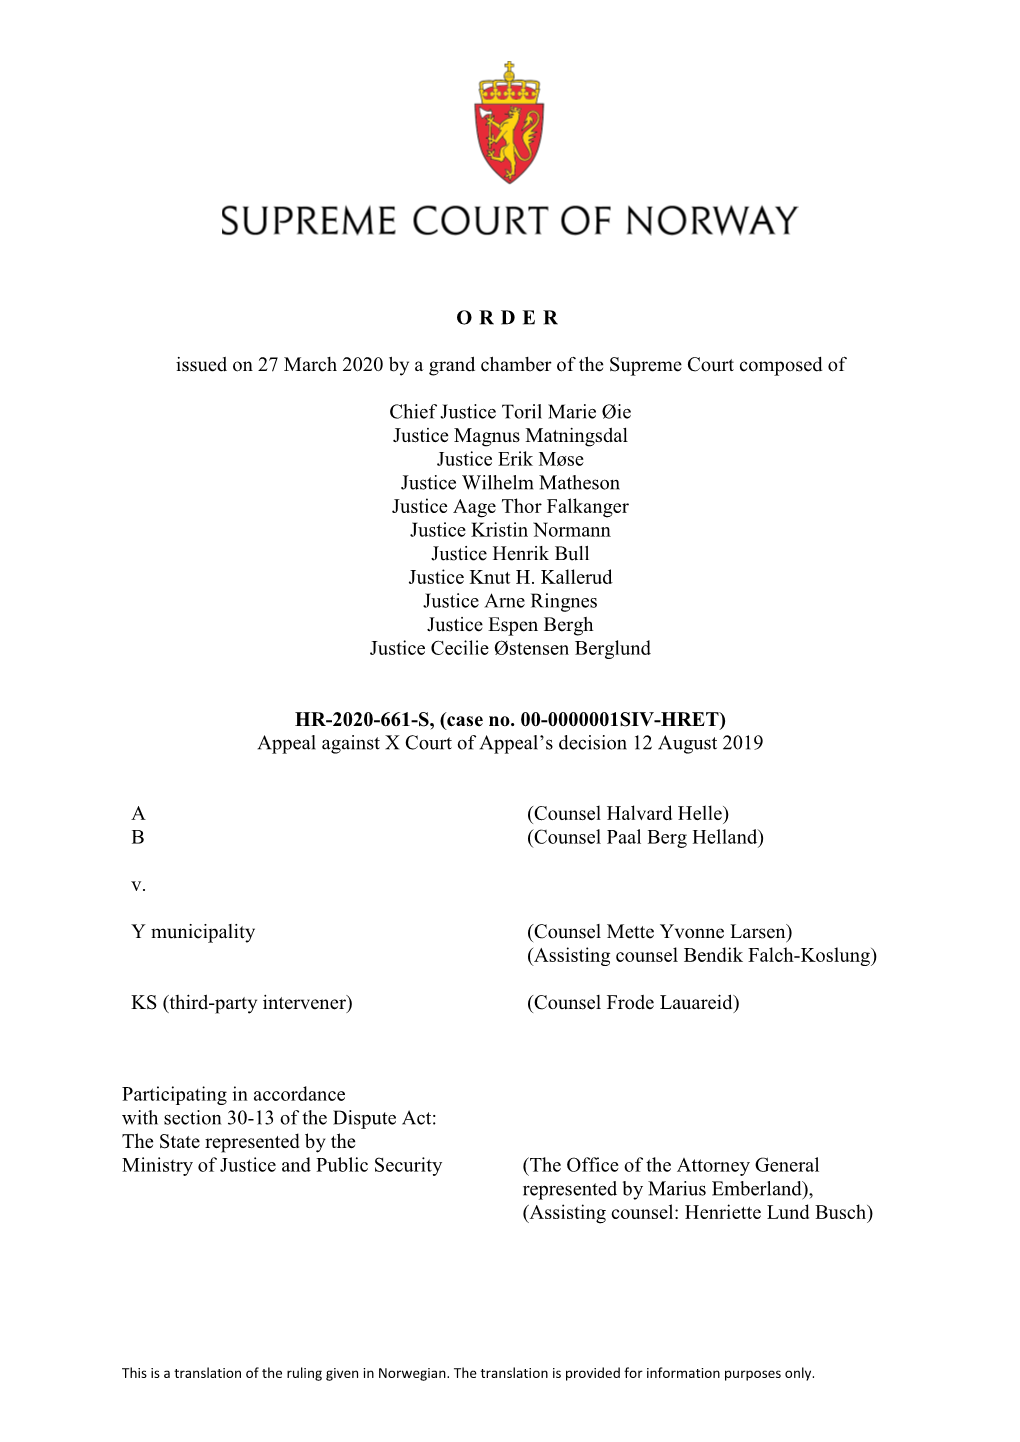 ORDER Issued on 27 March 2020 by a Grand Chamber of the Supreme